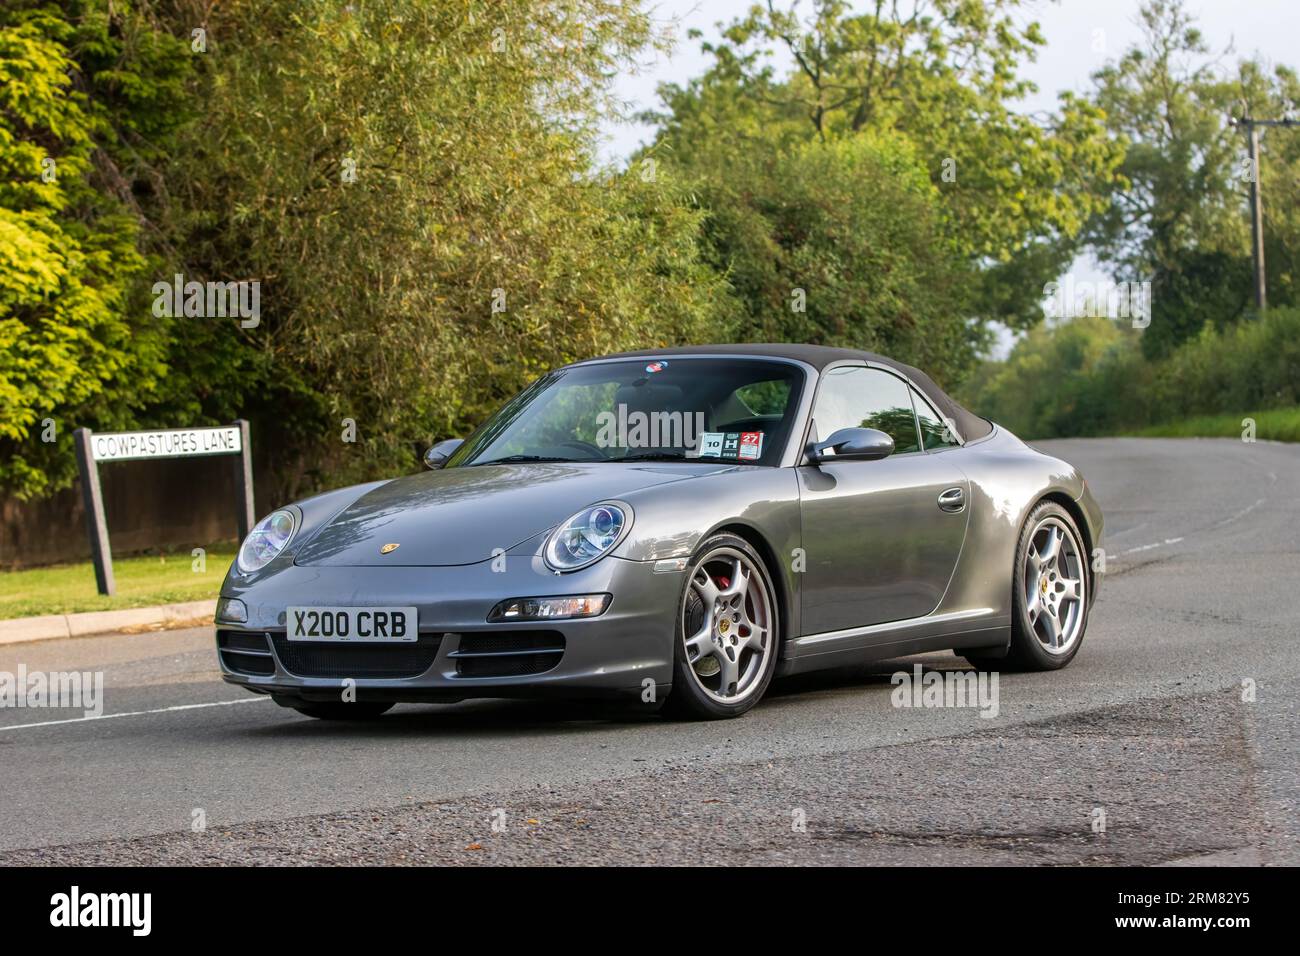 Whittlebury,Northants,UK -Aug 26th 2023: 2009 grey Porsche 911 Carrera car travelling on an English country road Stock Photo